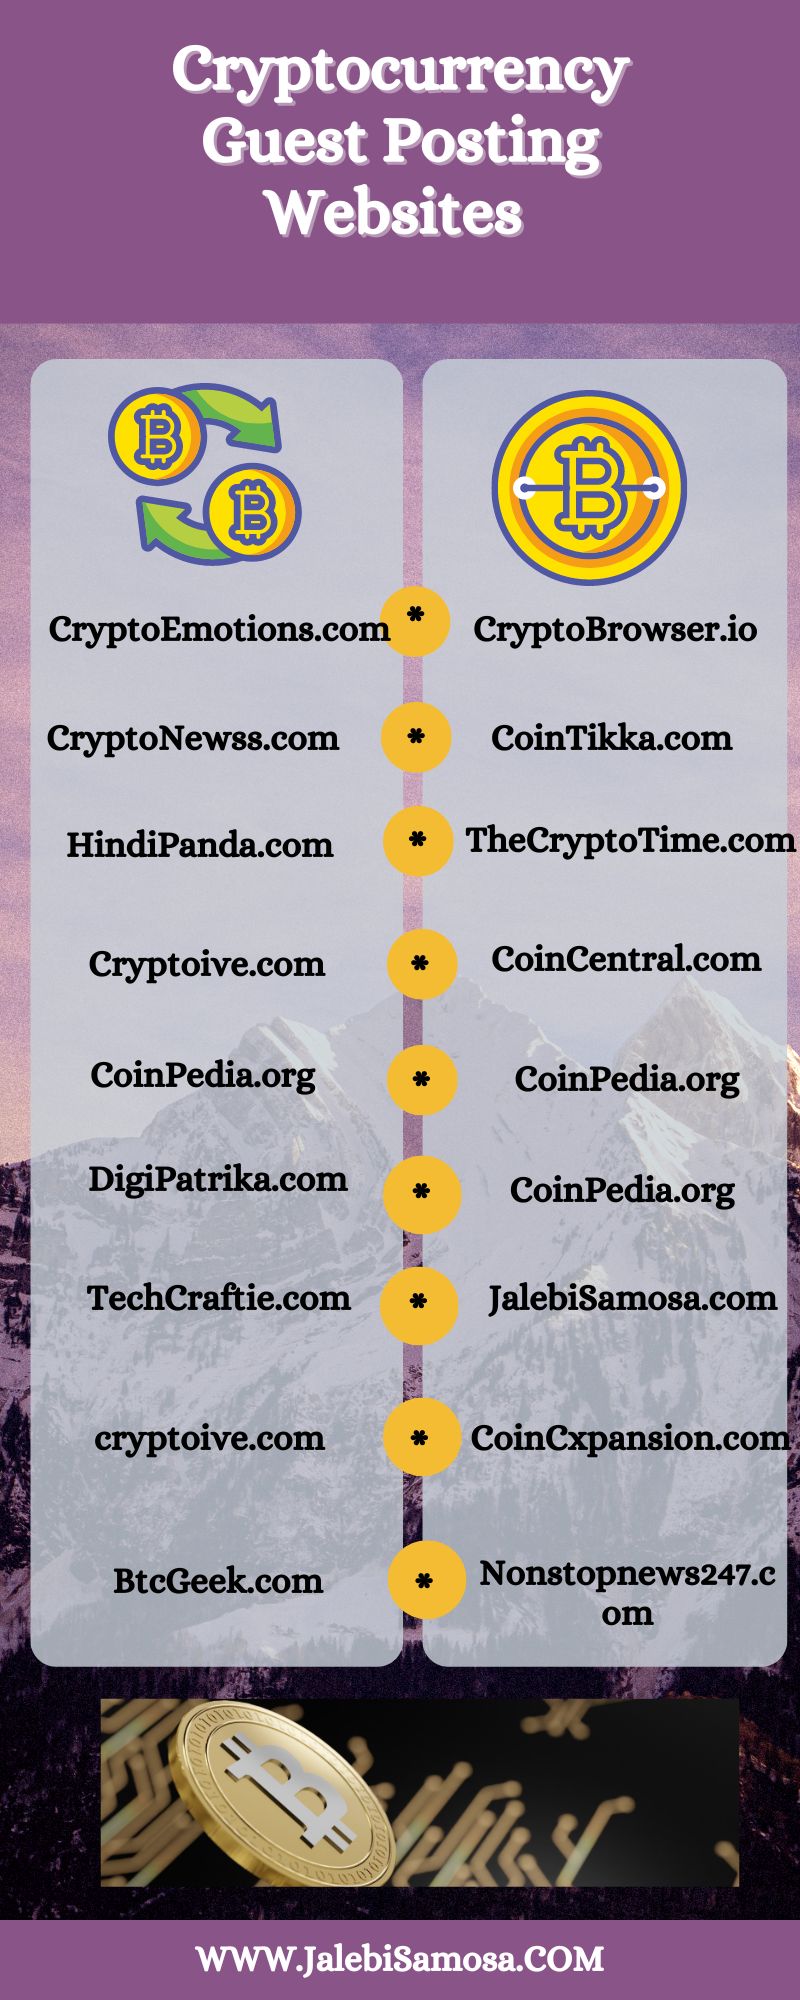 Cryptocurrency Guest Posts sites